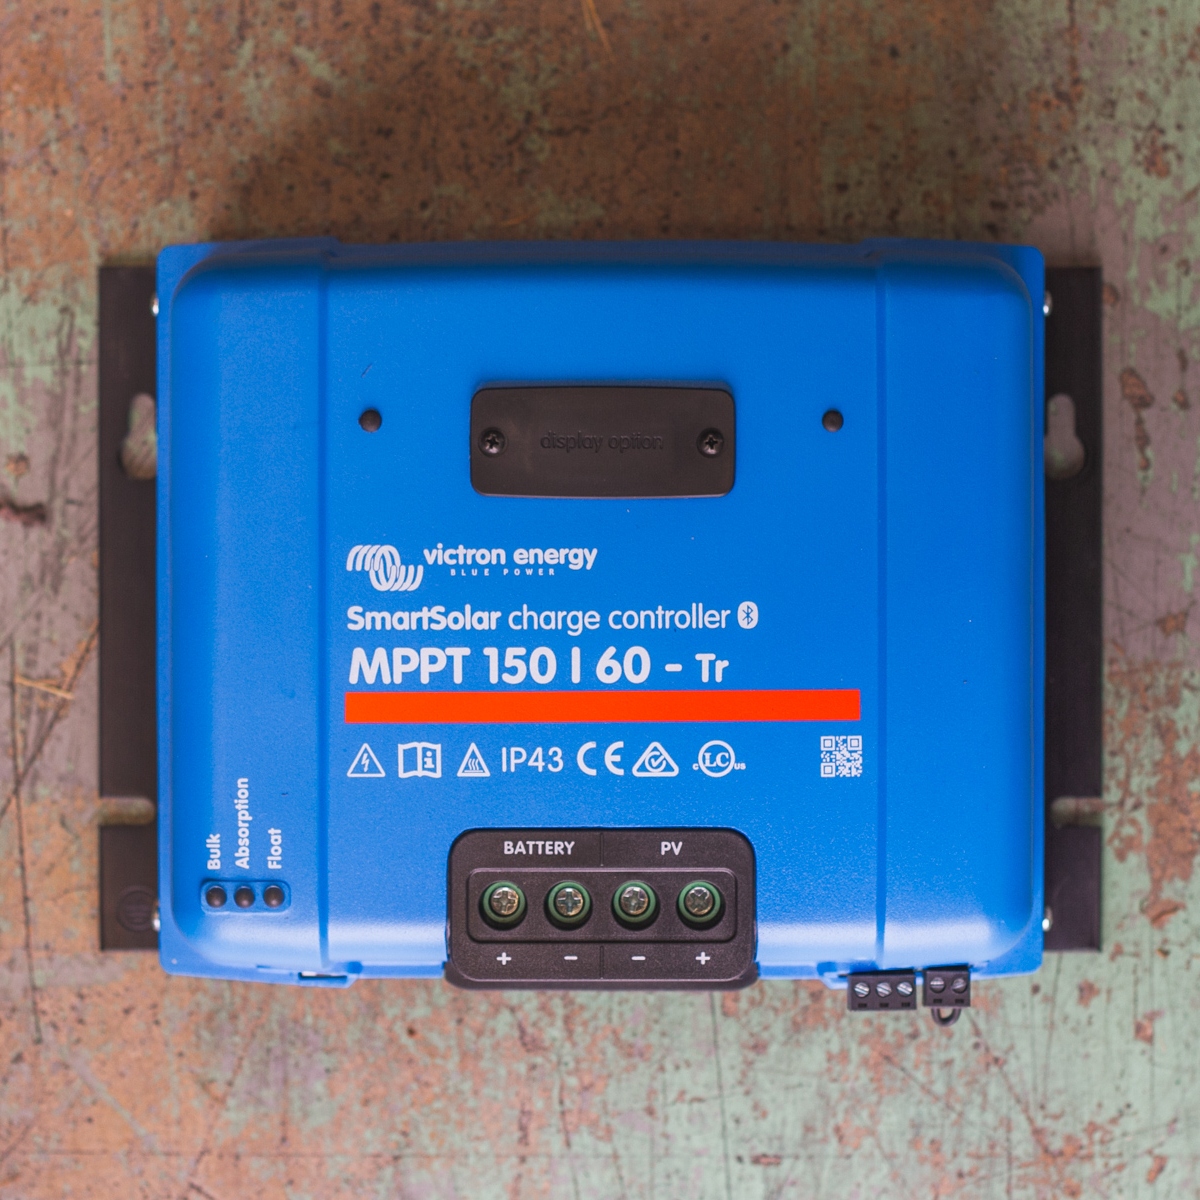 A blue Victron MPPT 150/60 - SmartSolar Charge Controller - Tr rests elegantly on a wooden surface.